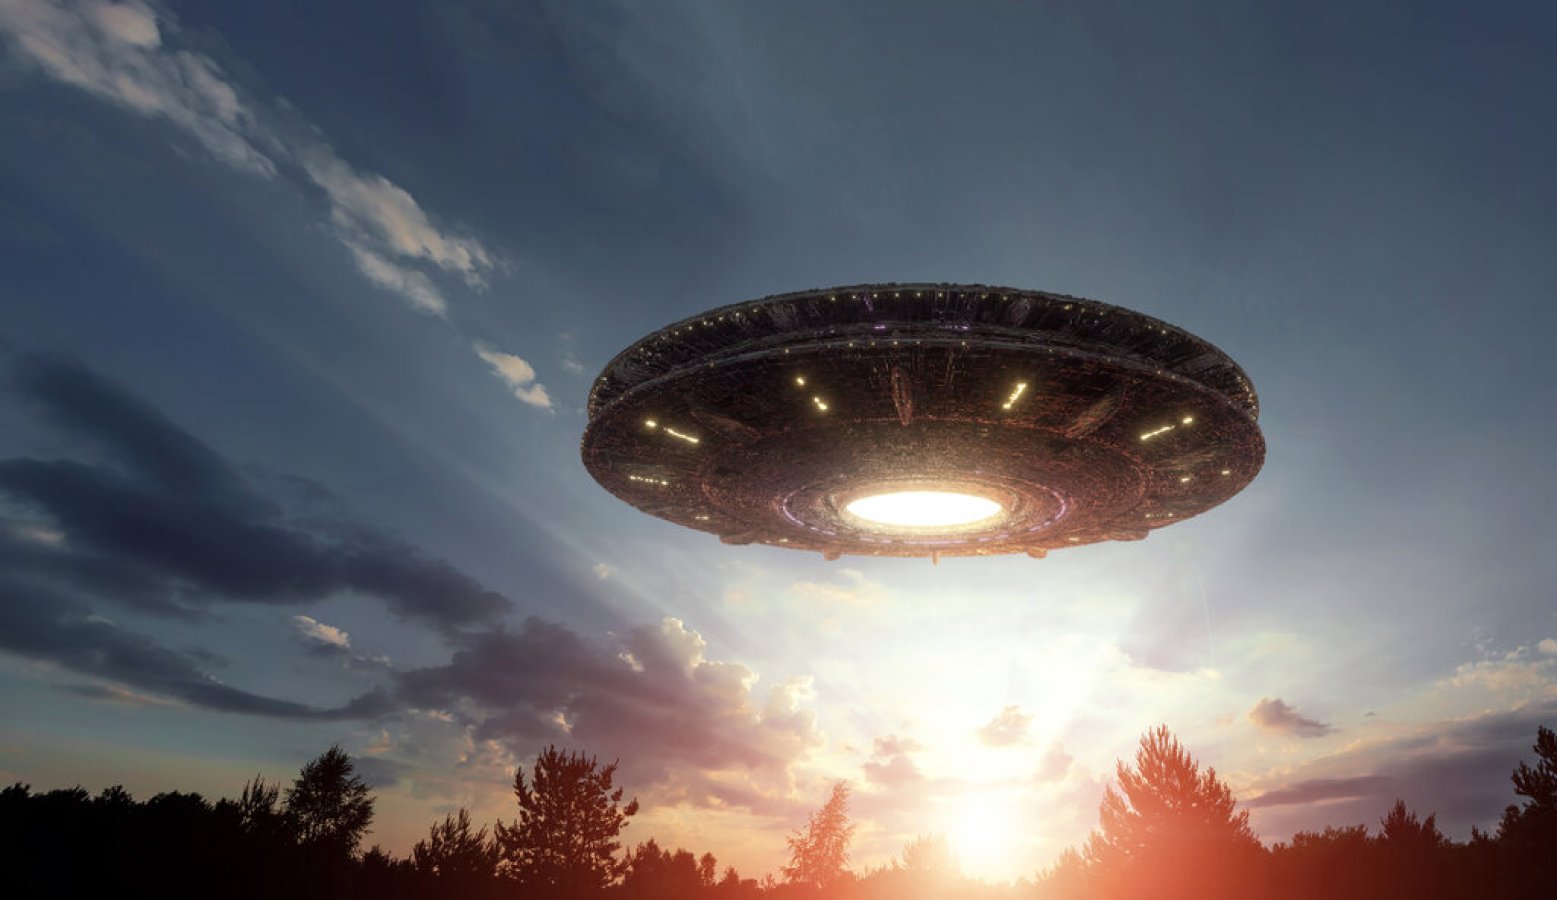 UFO Image Revealed After Decades Of Secrecy